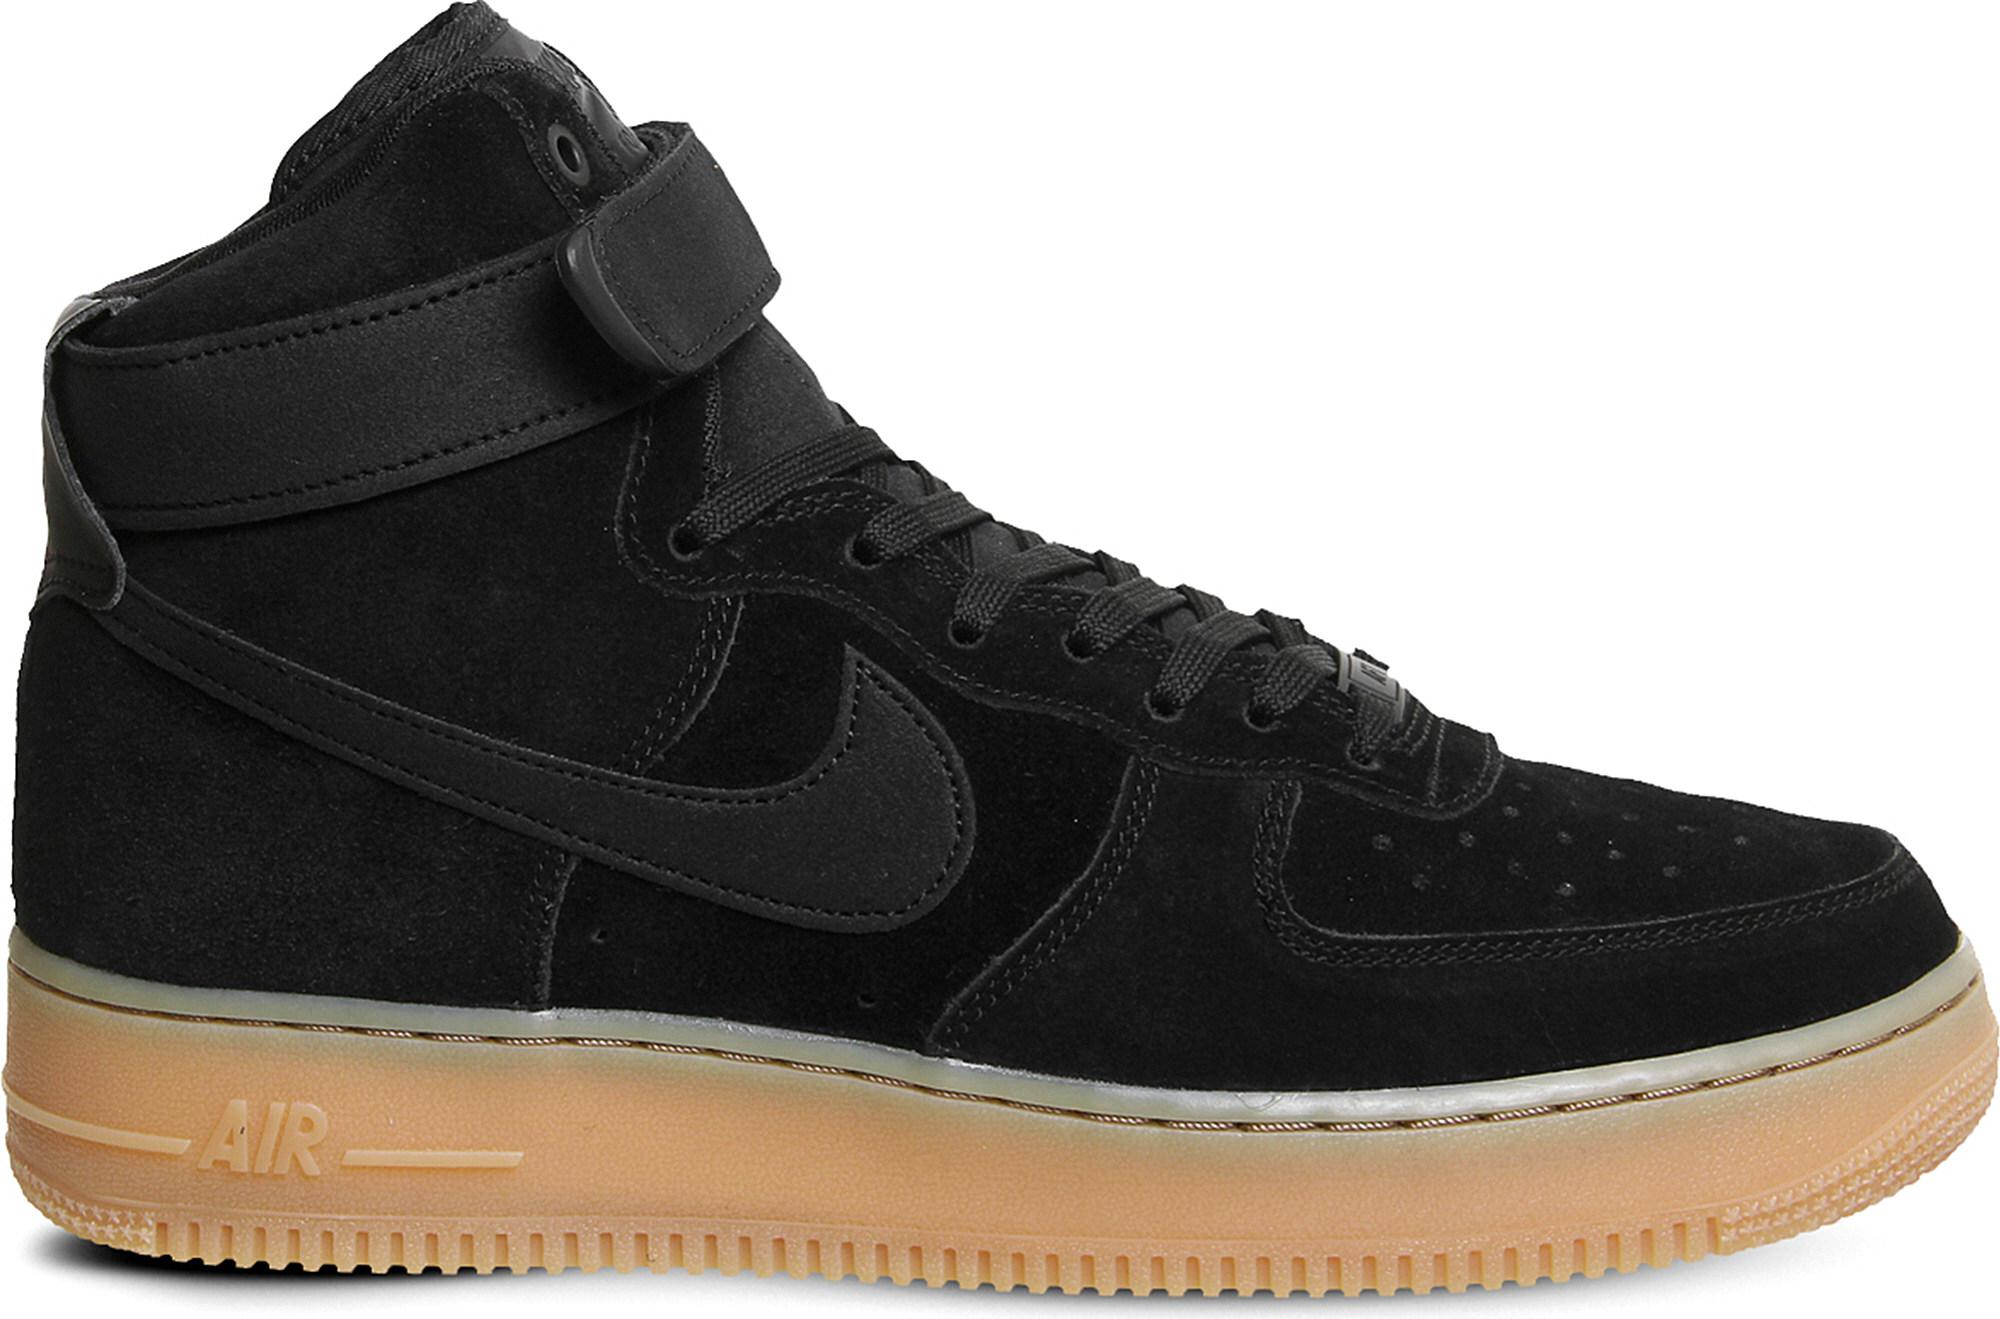 Nike Nike Air Force 1 High '07 Lv8 Suede in Black for Men - Lyst